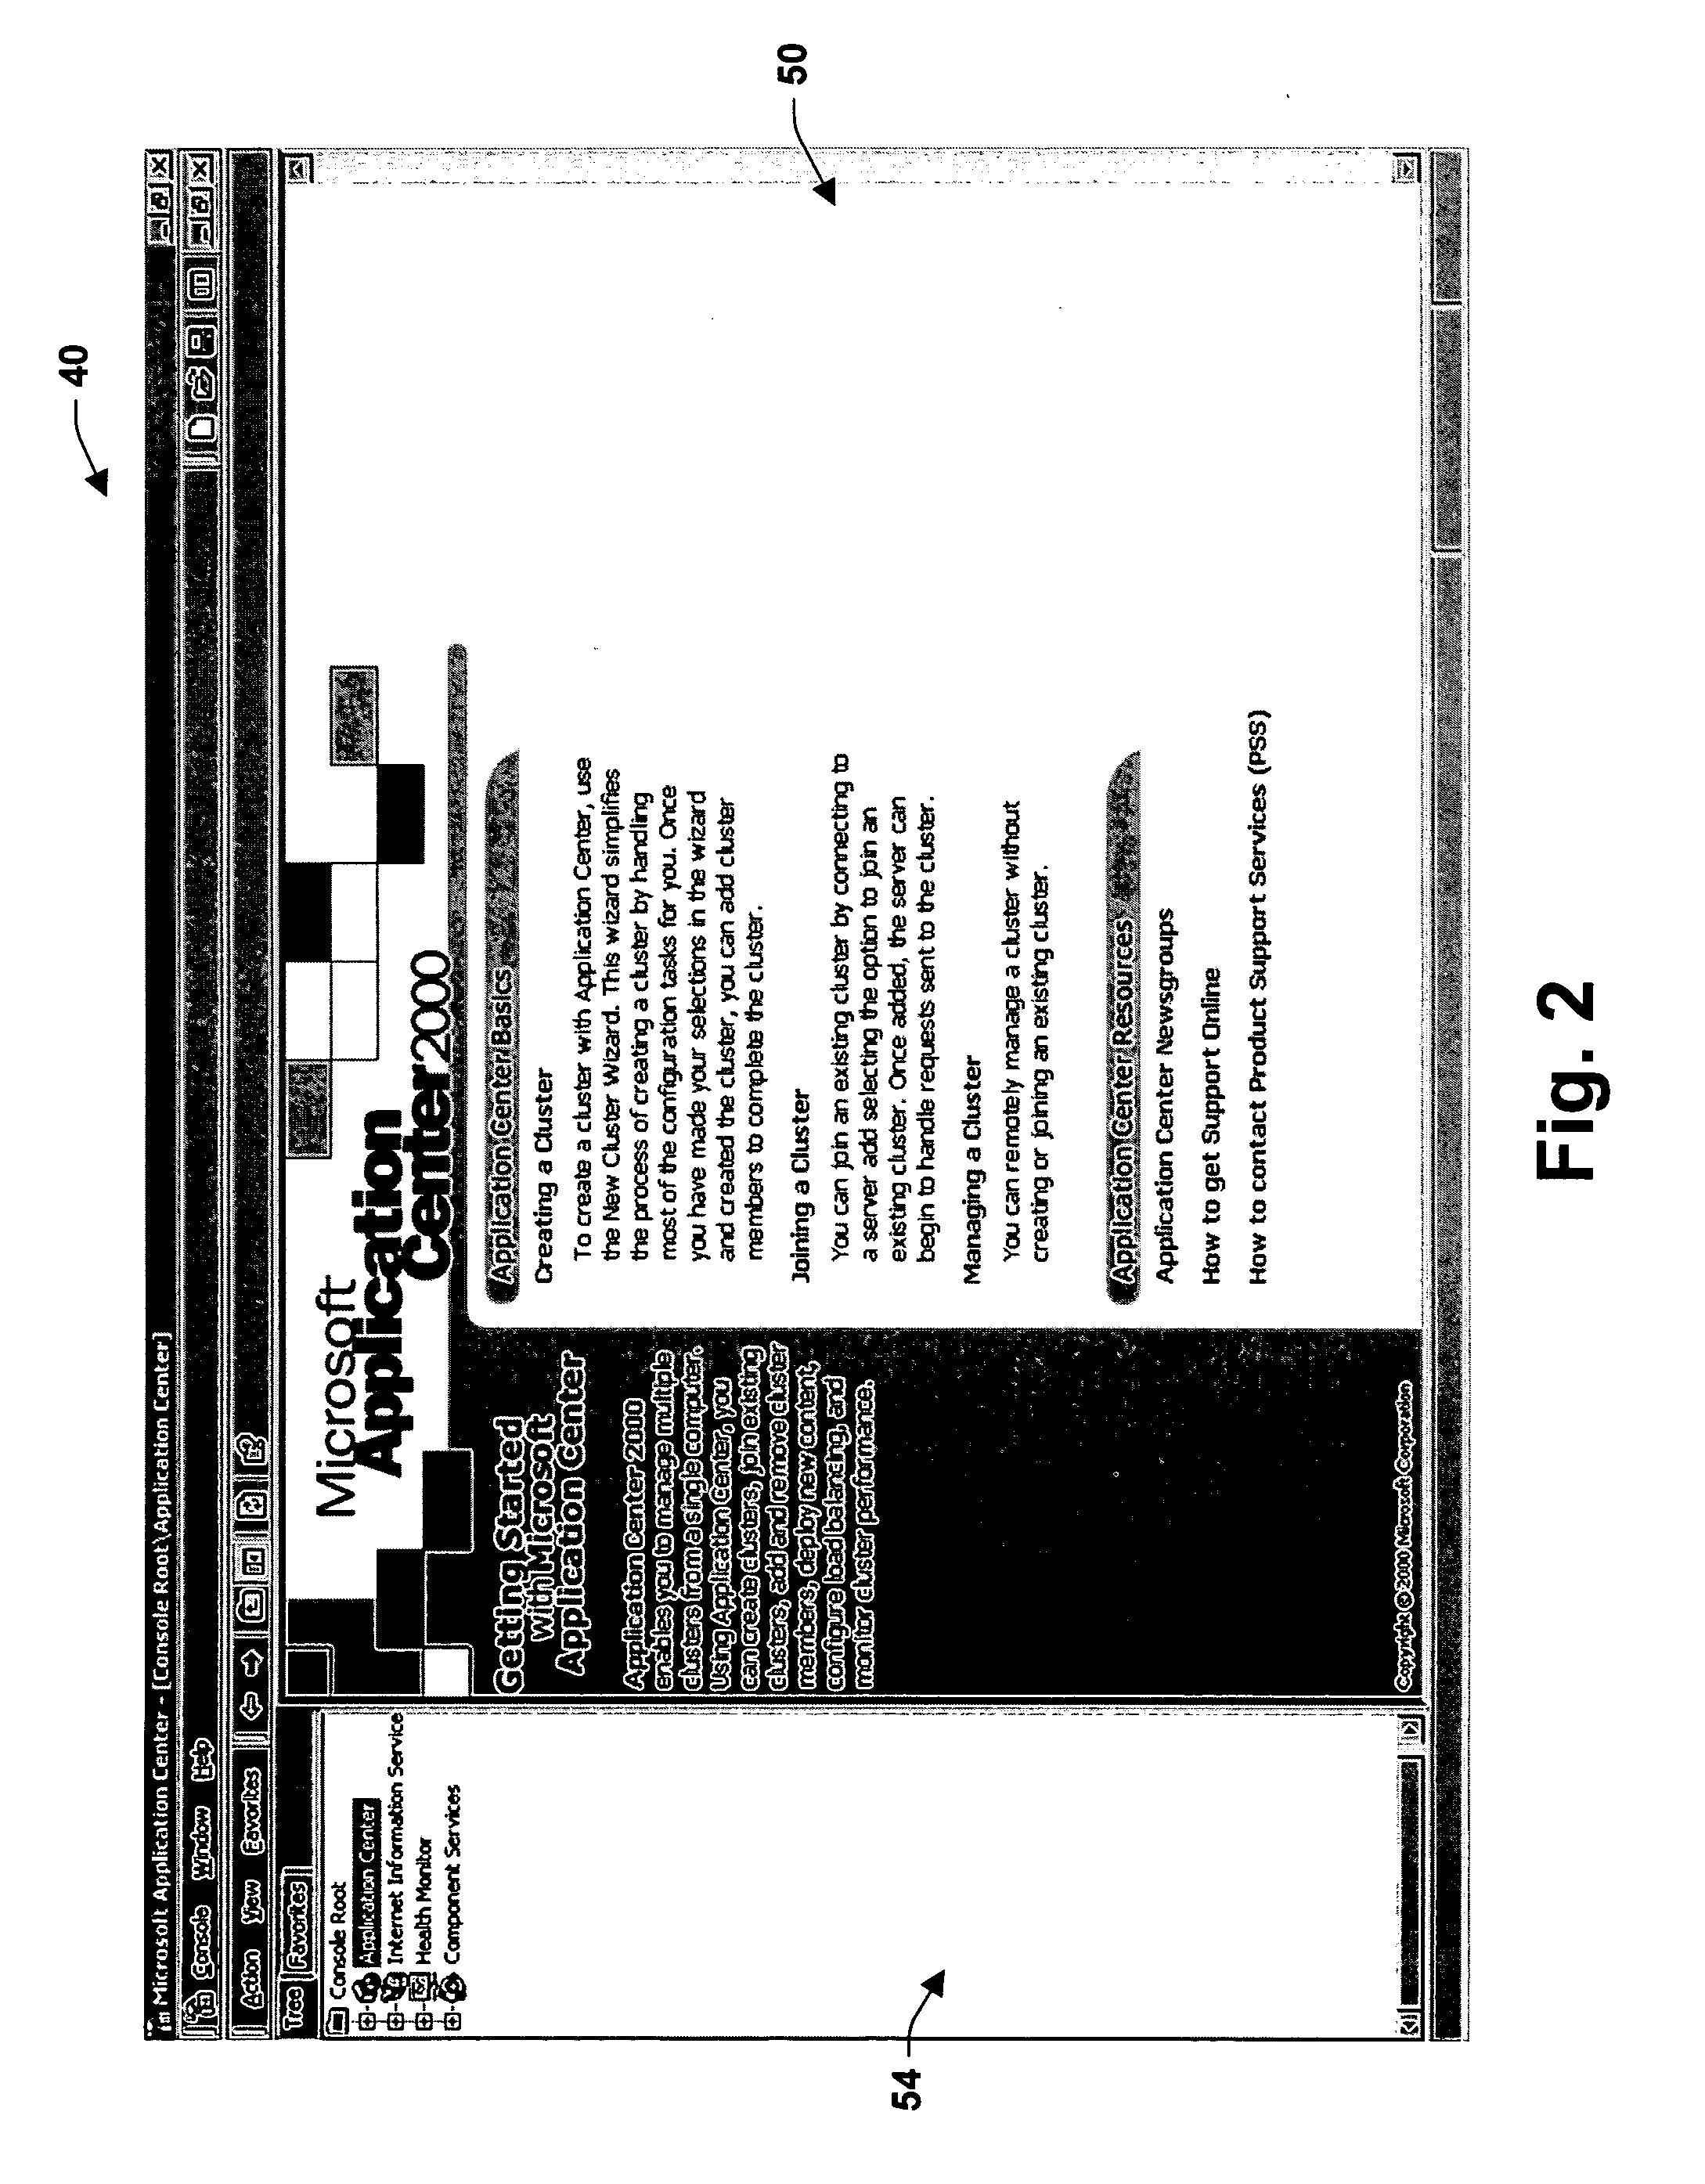 User interface to display and manage an entity and associated resources